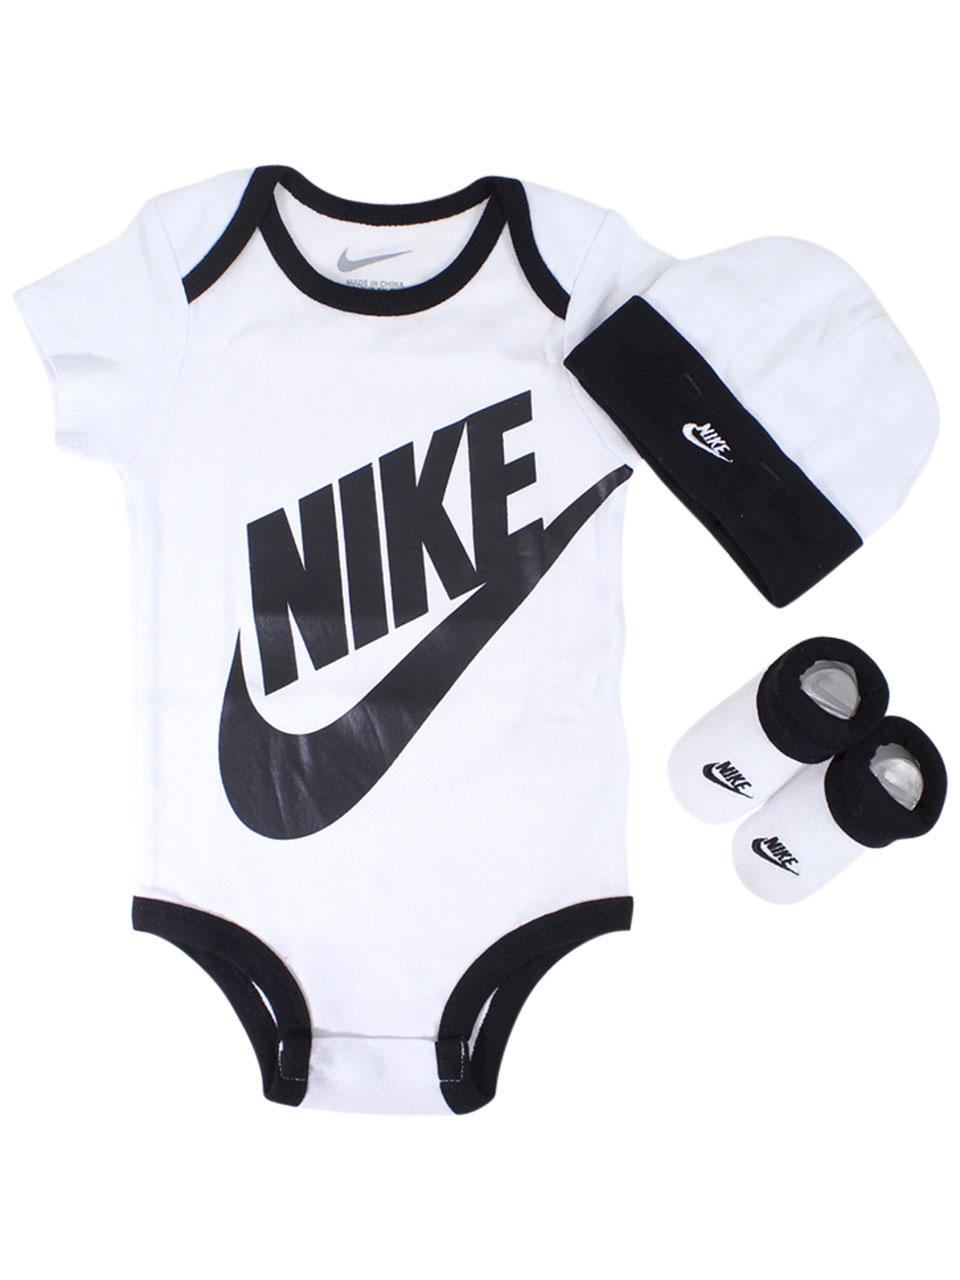 nike outfit for infant boy